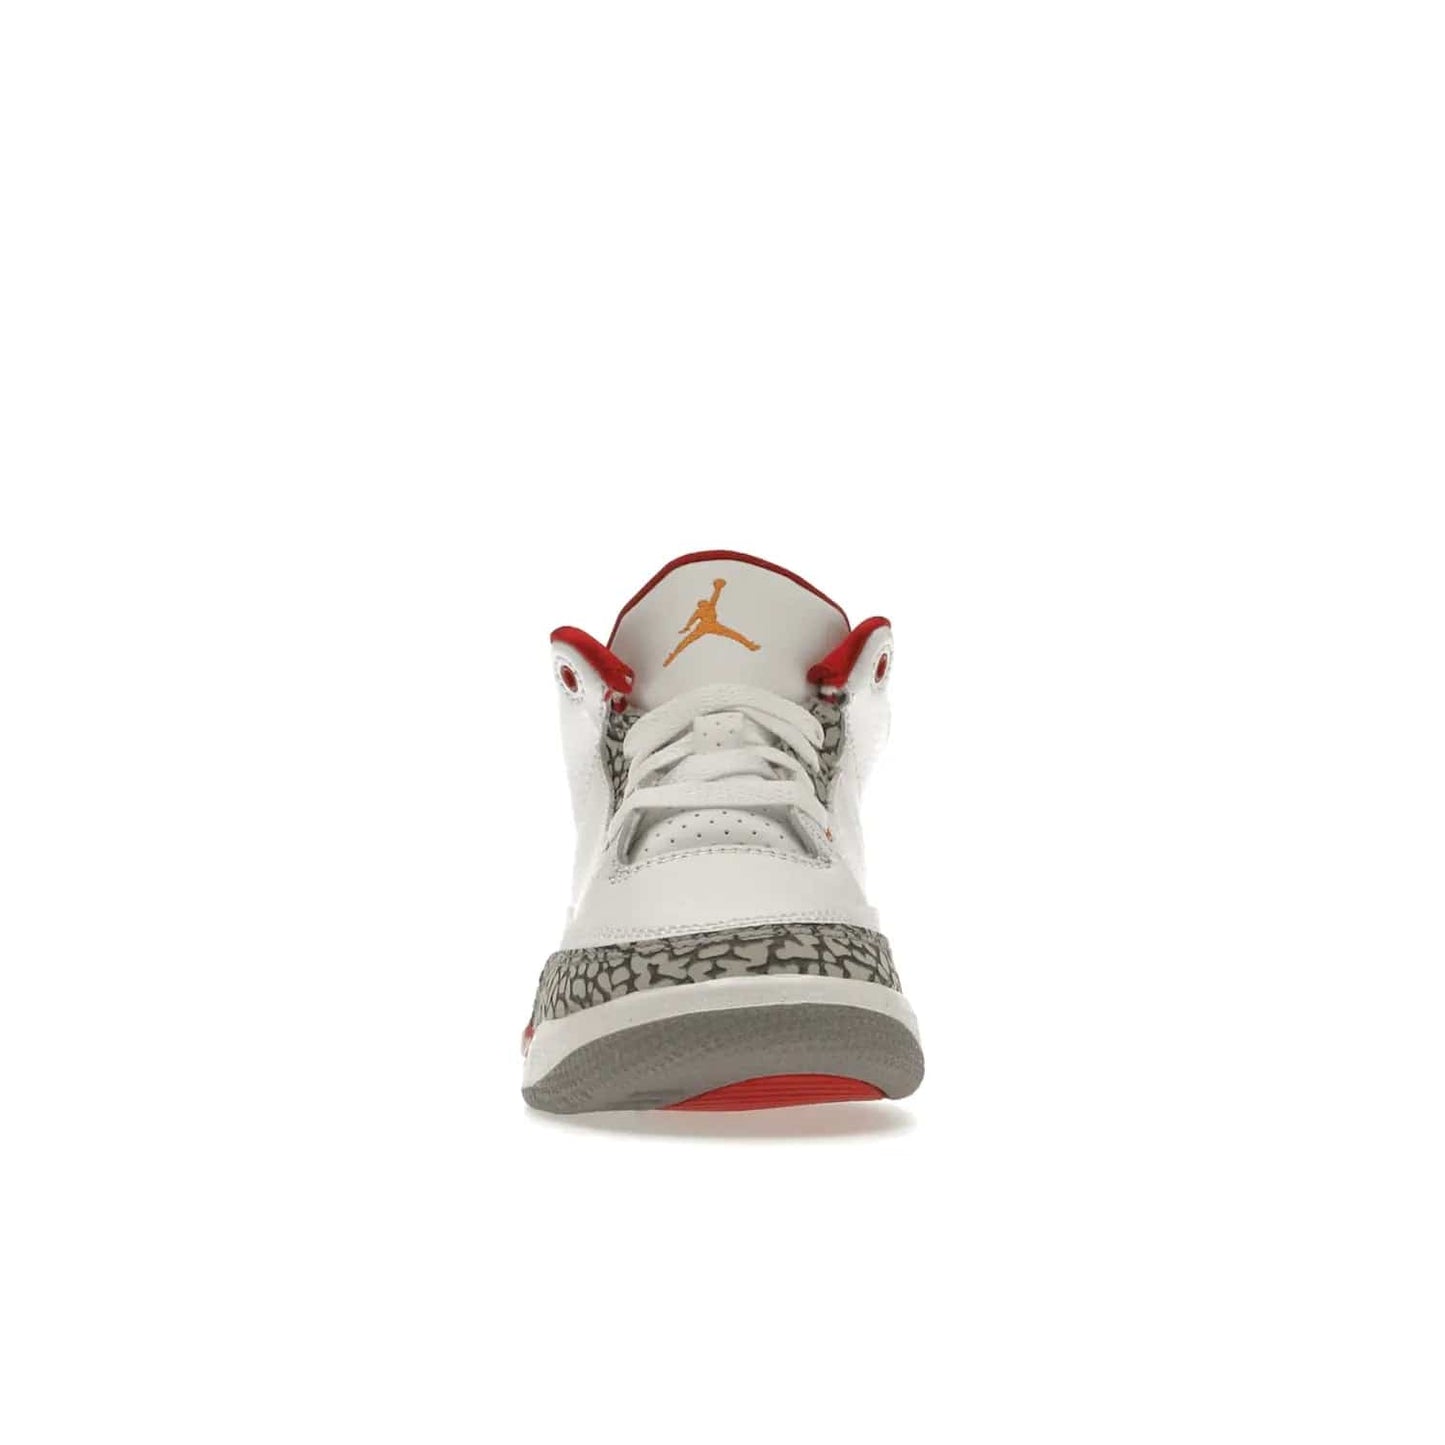 Jordan 3 Retro Cardinal (PS) - Image 10 - Only at www.BallersClubKickz.com - Add retro style to your sneaker collection with the Jordan 3 Retro Cardinal (PS). Featuring classic Jordan 3 details and colors of cardinal red, light curry, and cement grey. Available Feb. 2022.